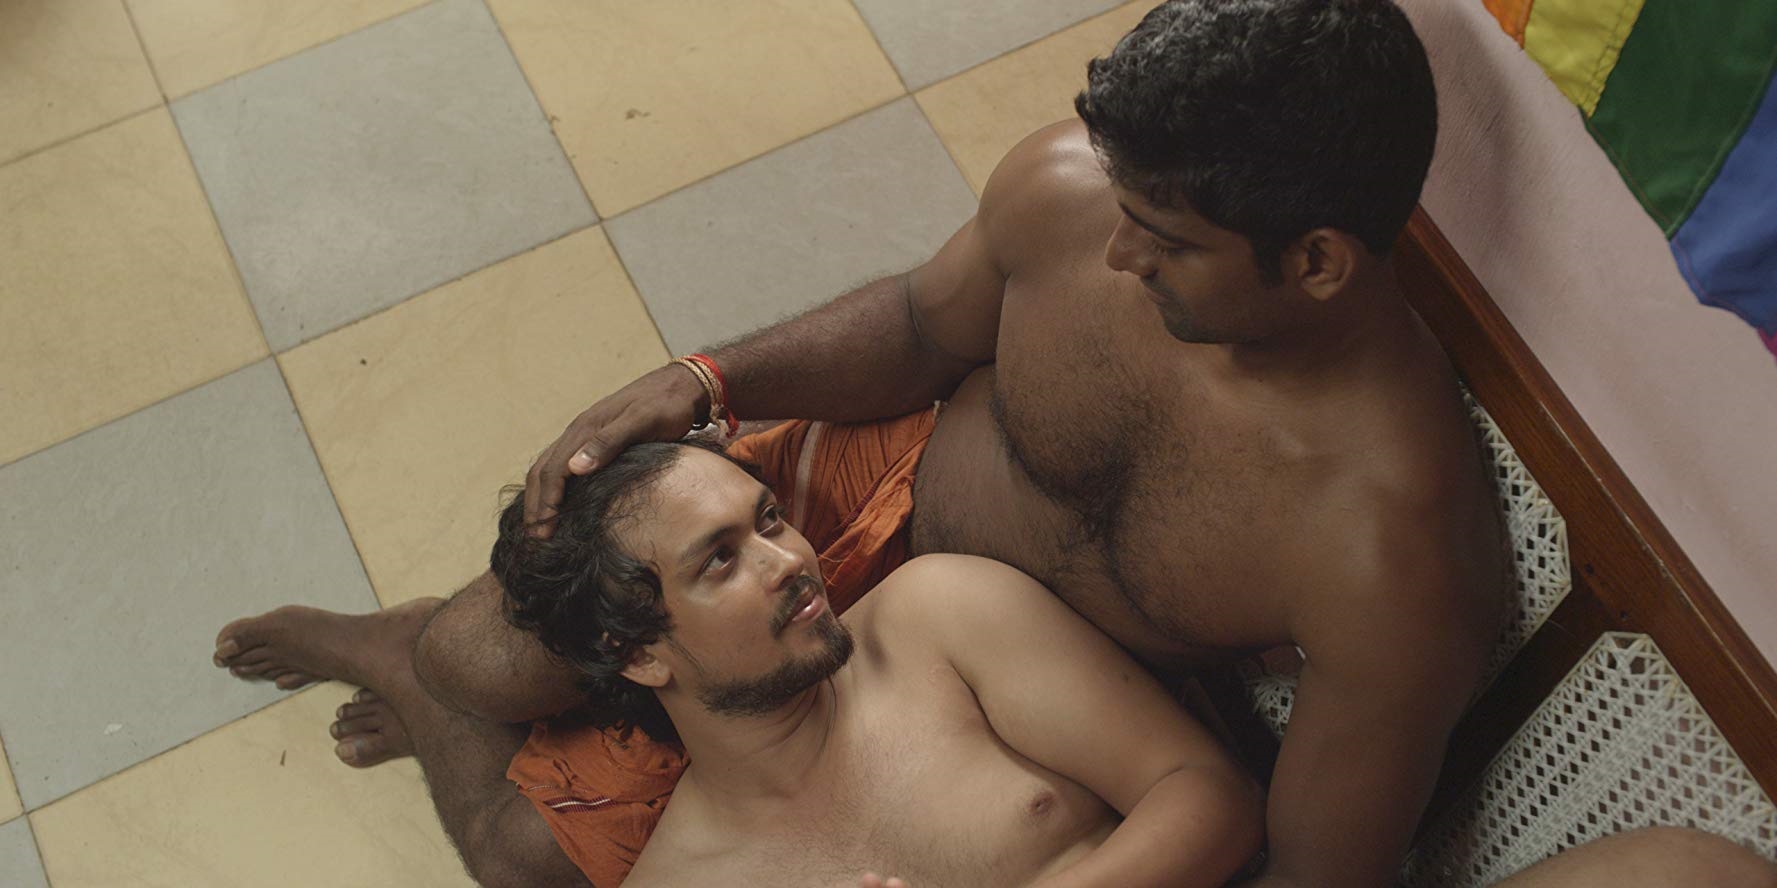 Indian Film Banned For Glorifying Homosexuality To